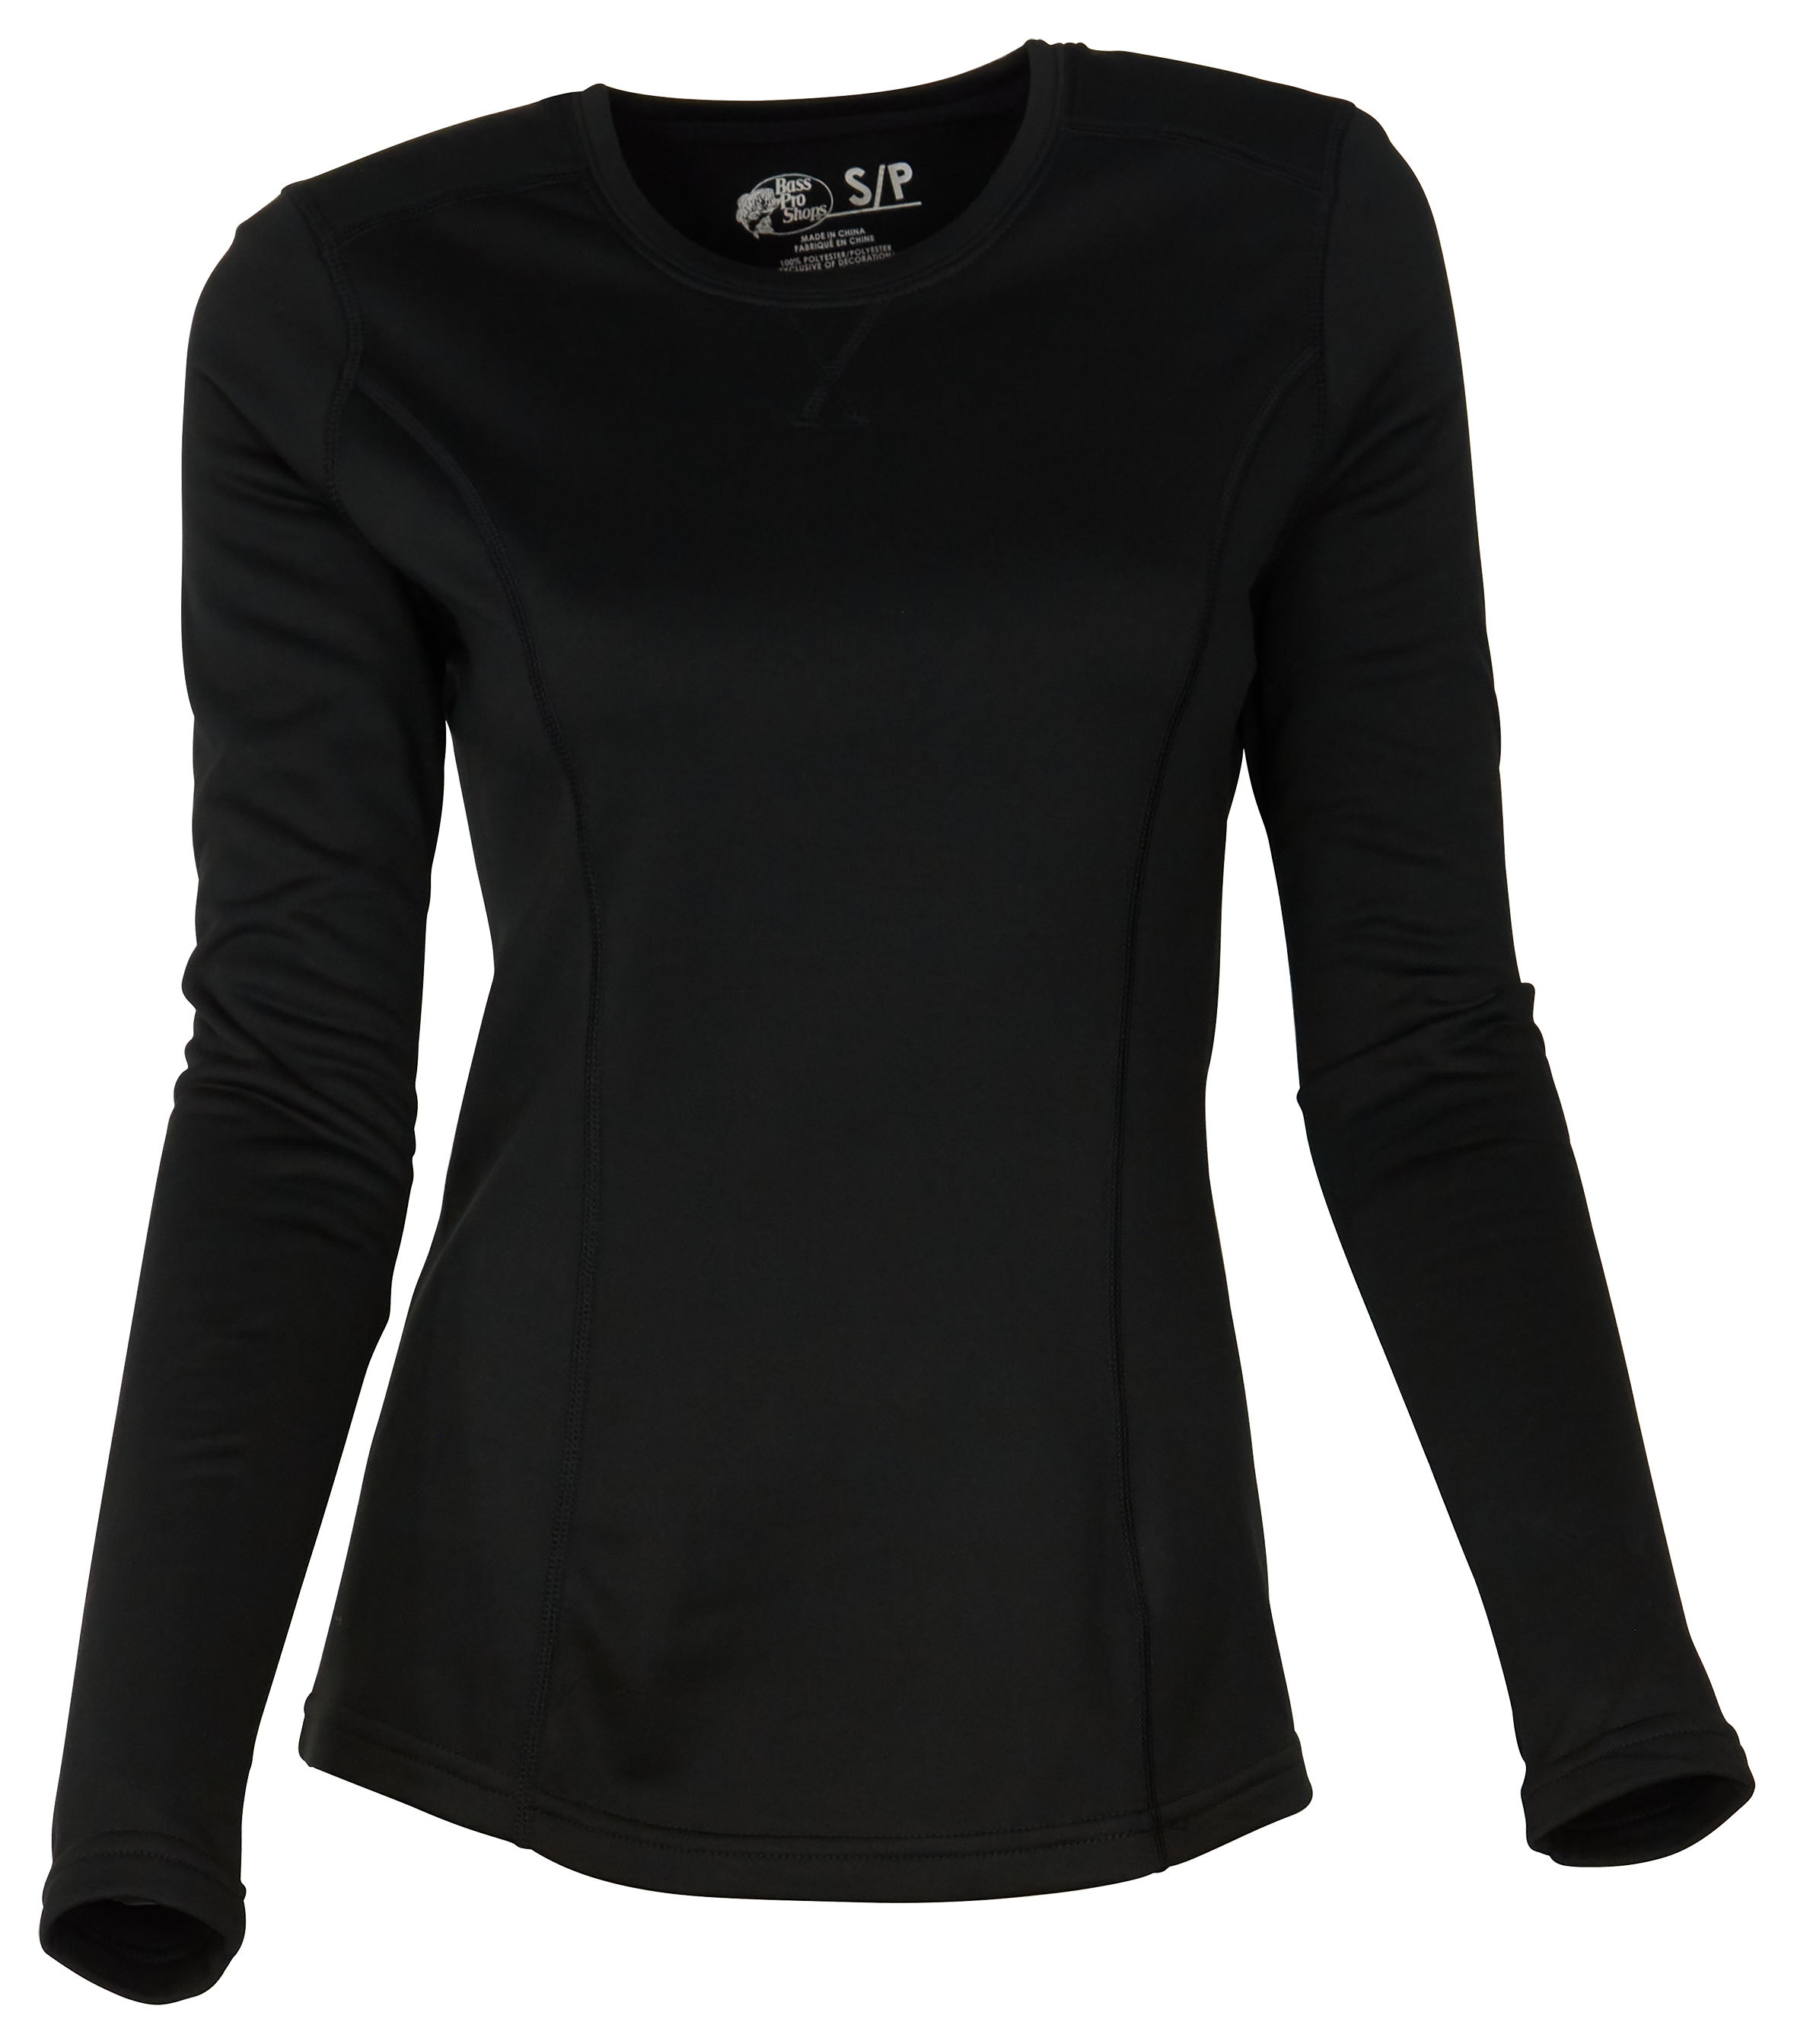 Bass Pro Shops Thermal Fleece Long-Sleeve Crew-Neck Top for Ladies - Black - L